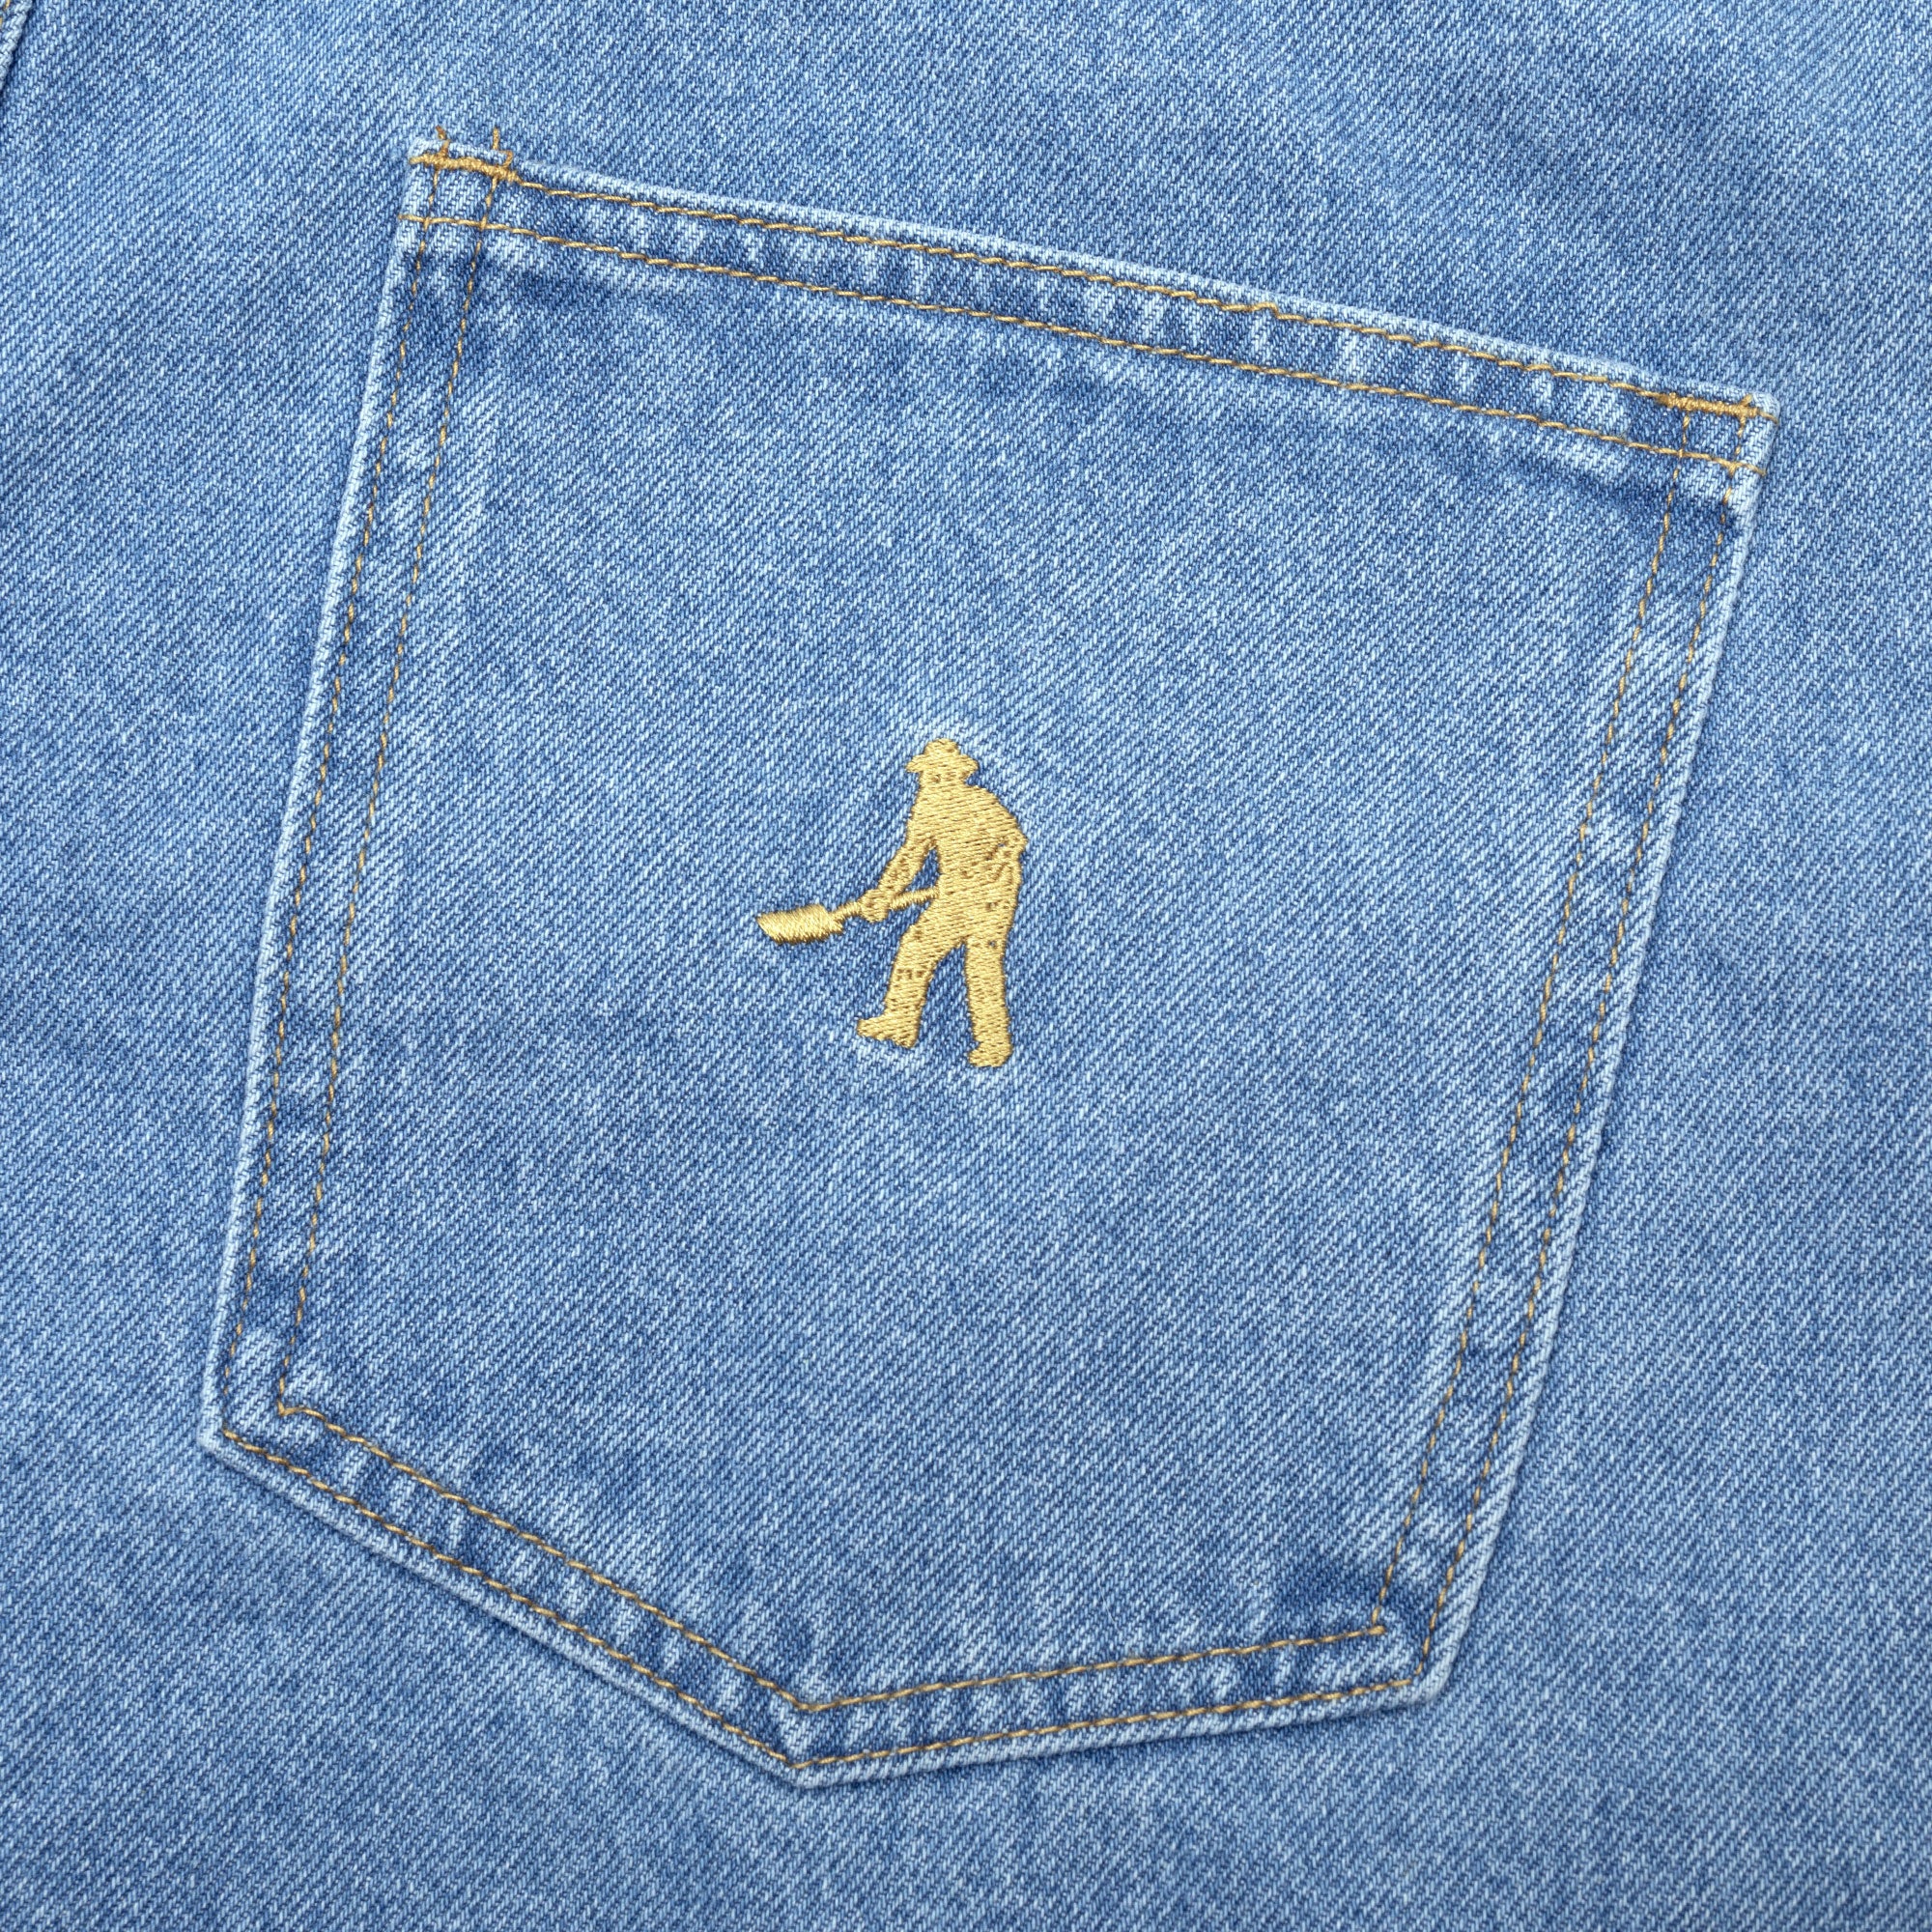 Workers Club Jean (Washed Light Indigo)